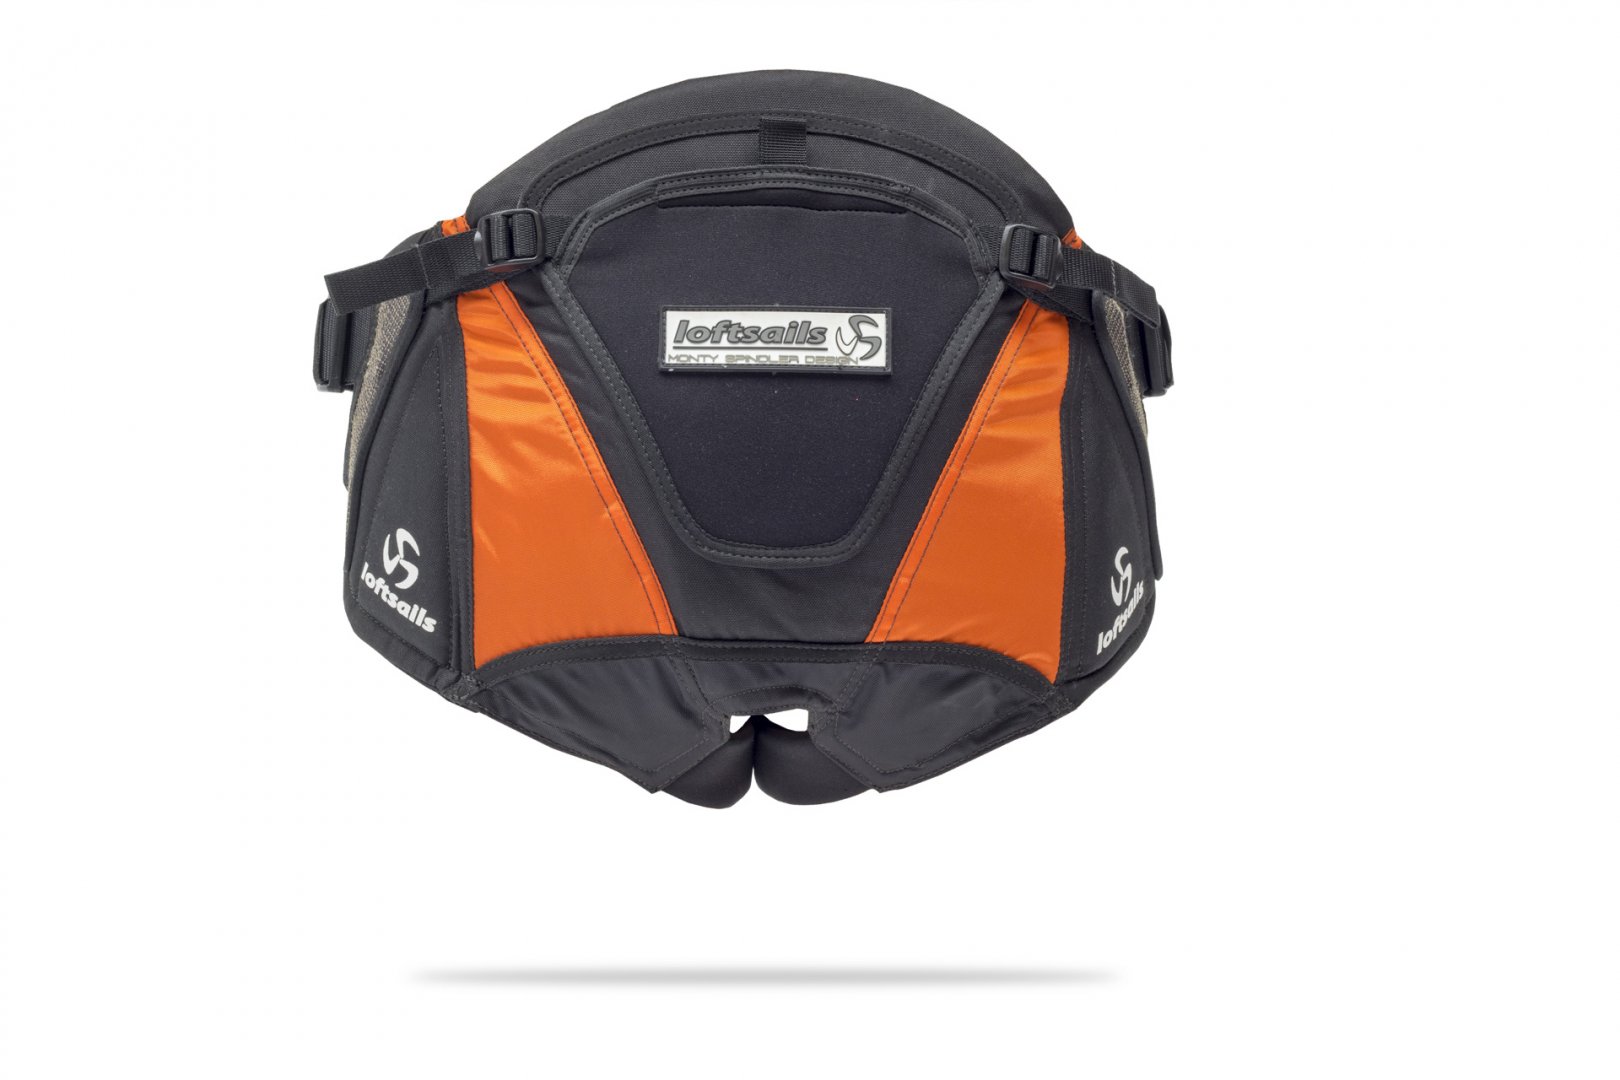 Loftsails Slalom Lite Harness - Large Size Only